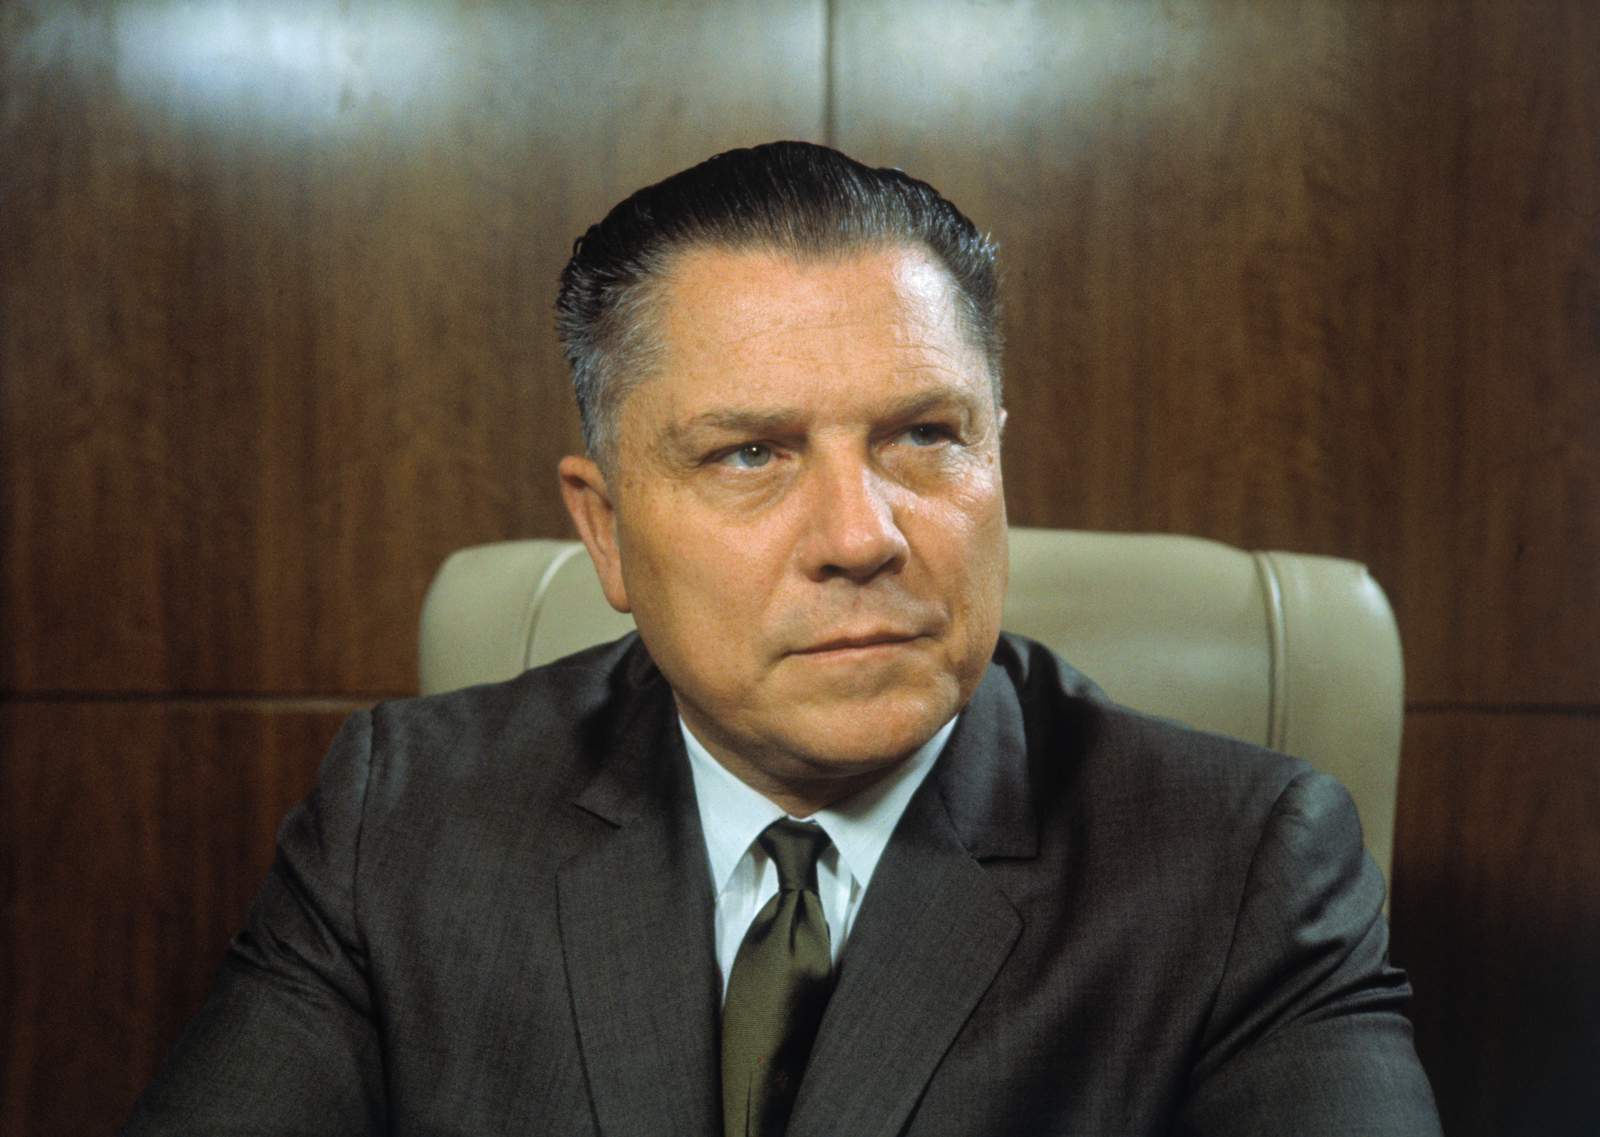 45 years later, Jimmy Hoffa case remains unsolved - WDIV ClickOnDetroit